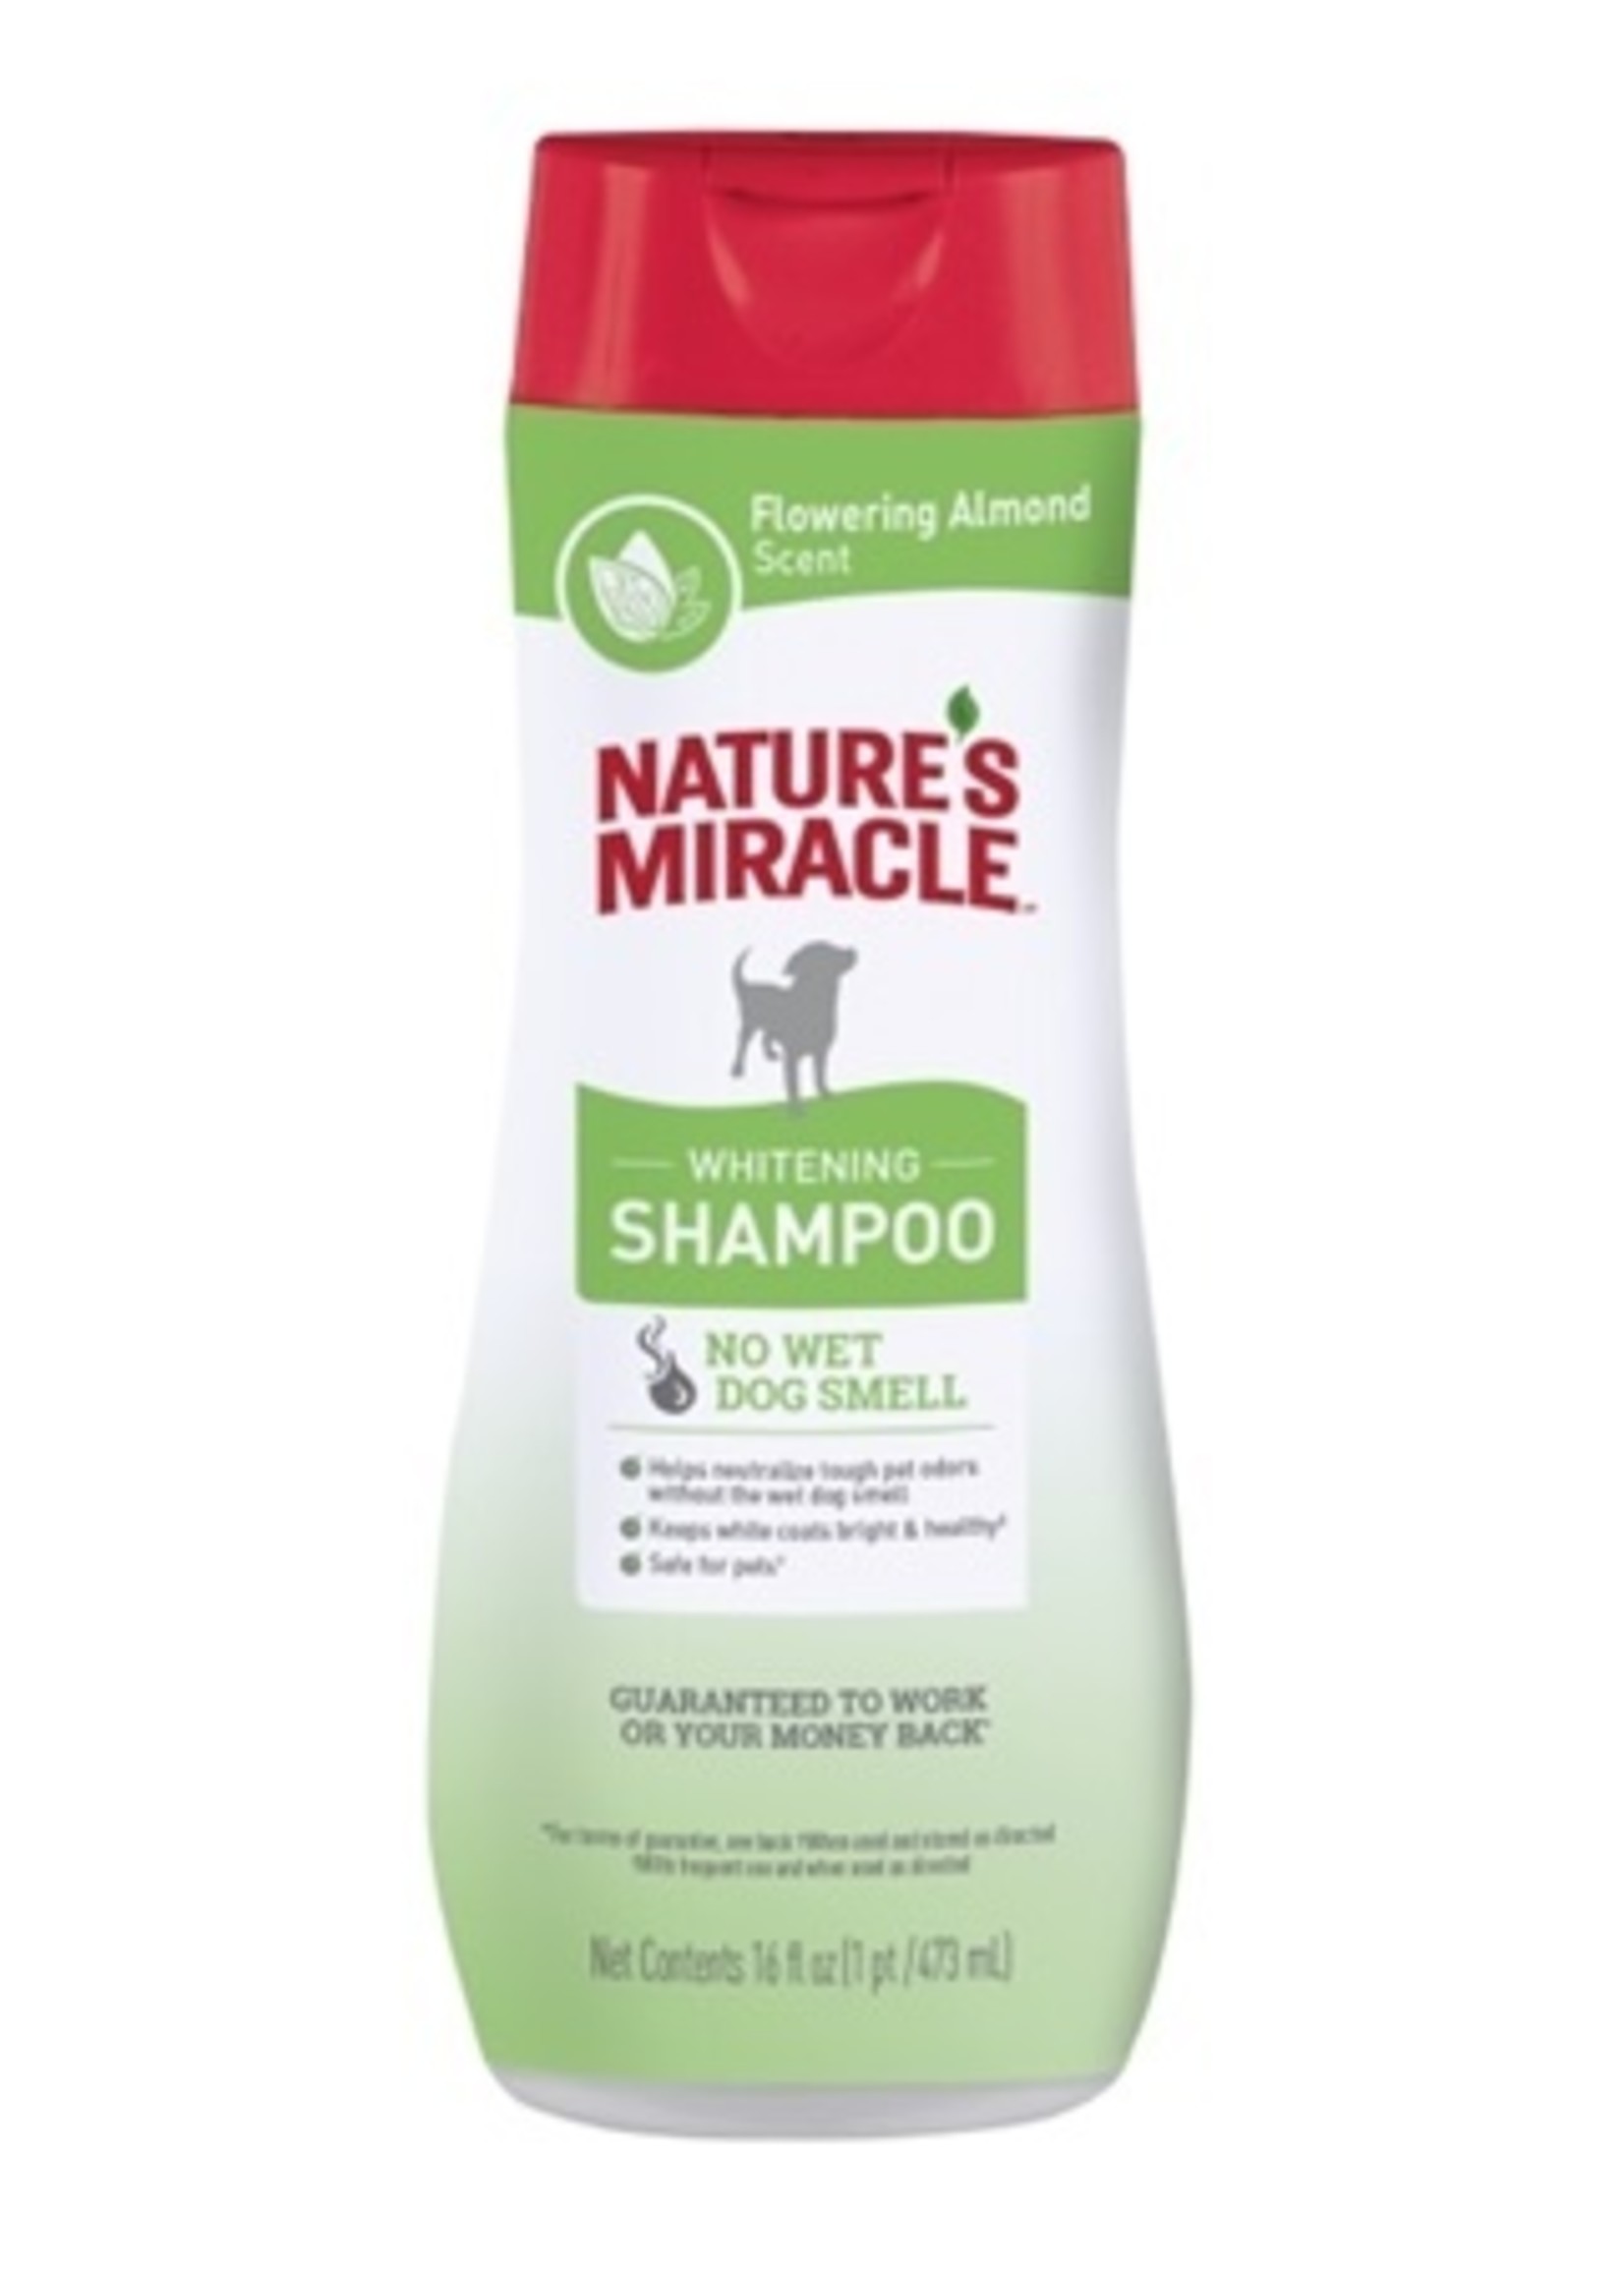 Nature's Miracle Nature's Miracle Shampoo 16 oz Whitening Scent